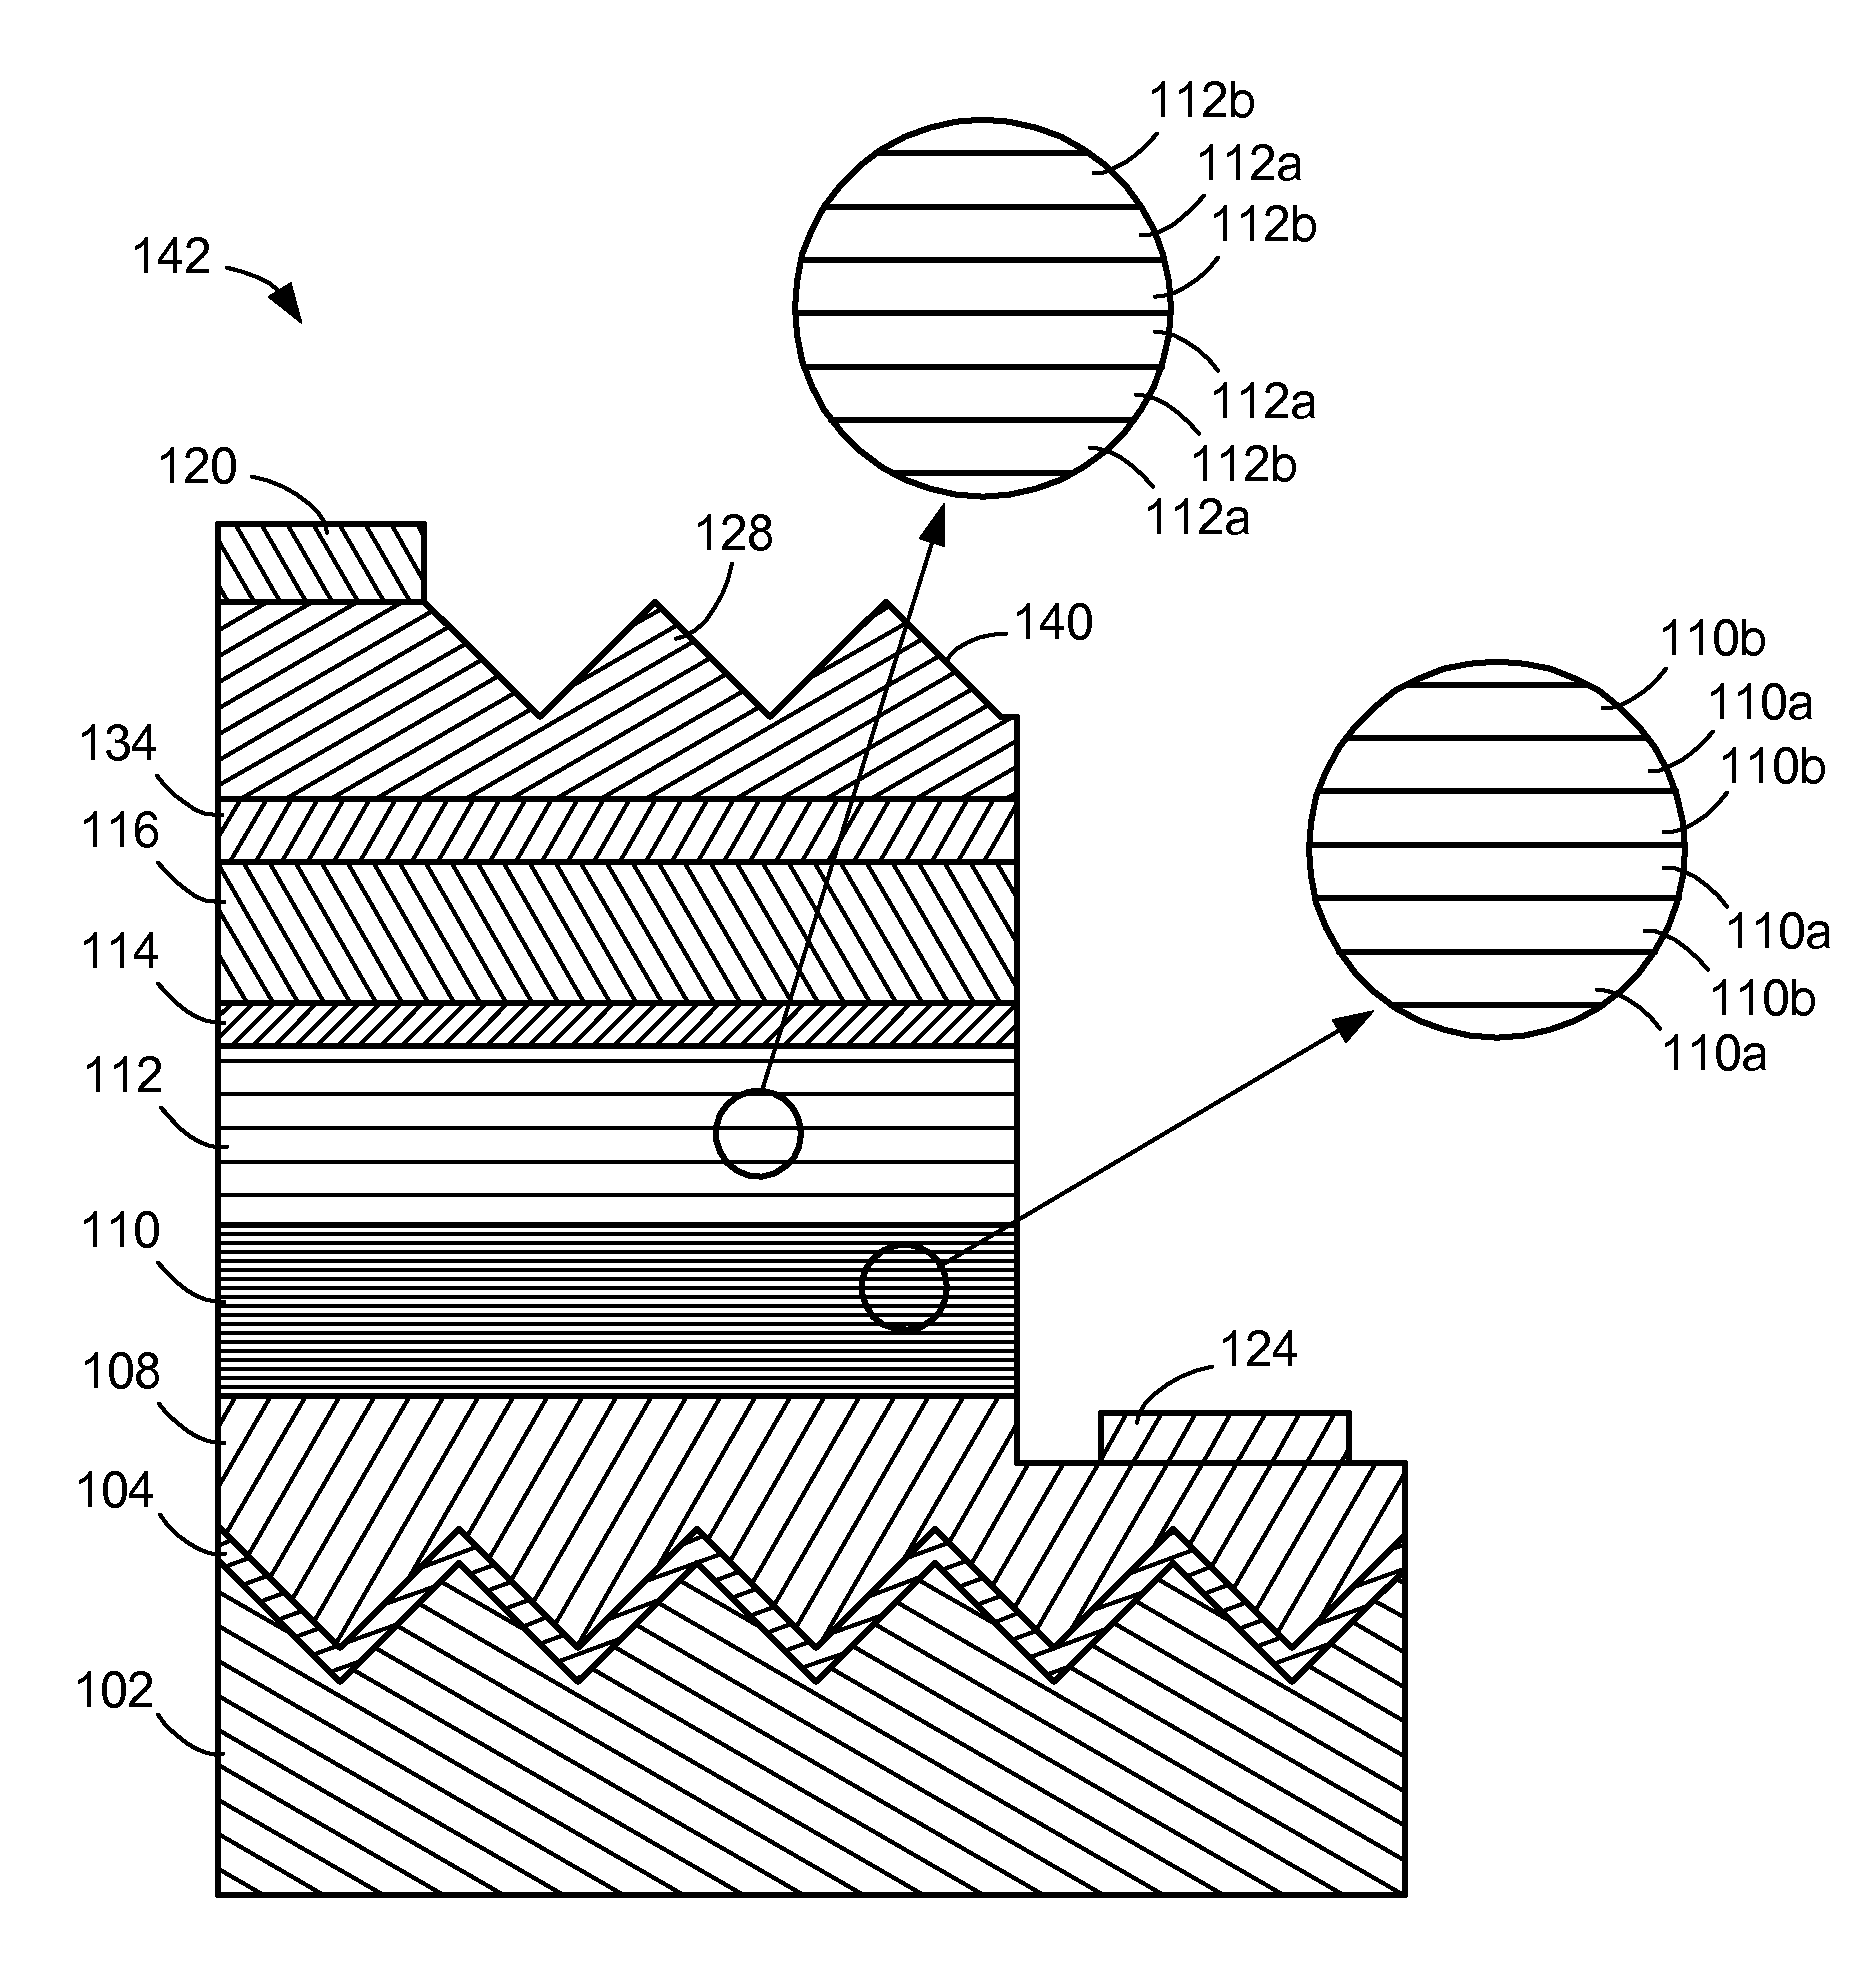 (Al,In,Ga,B)N DEVICE STRUCTURES ON A PATTERNED SUBSTRATE